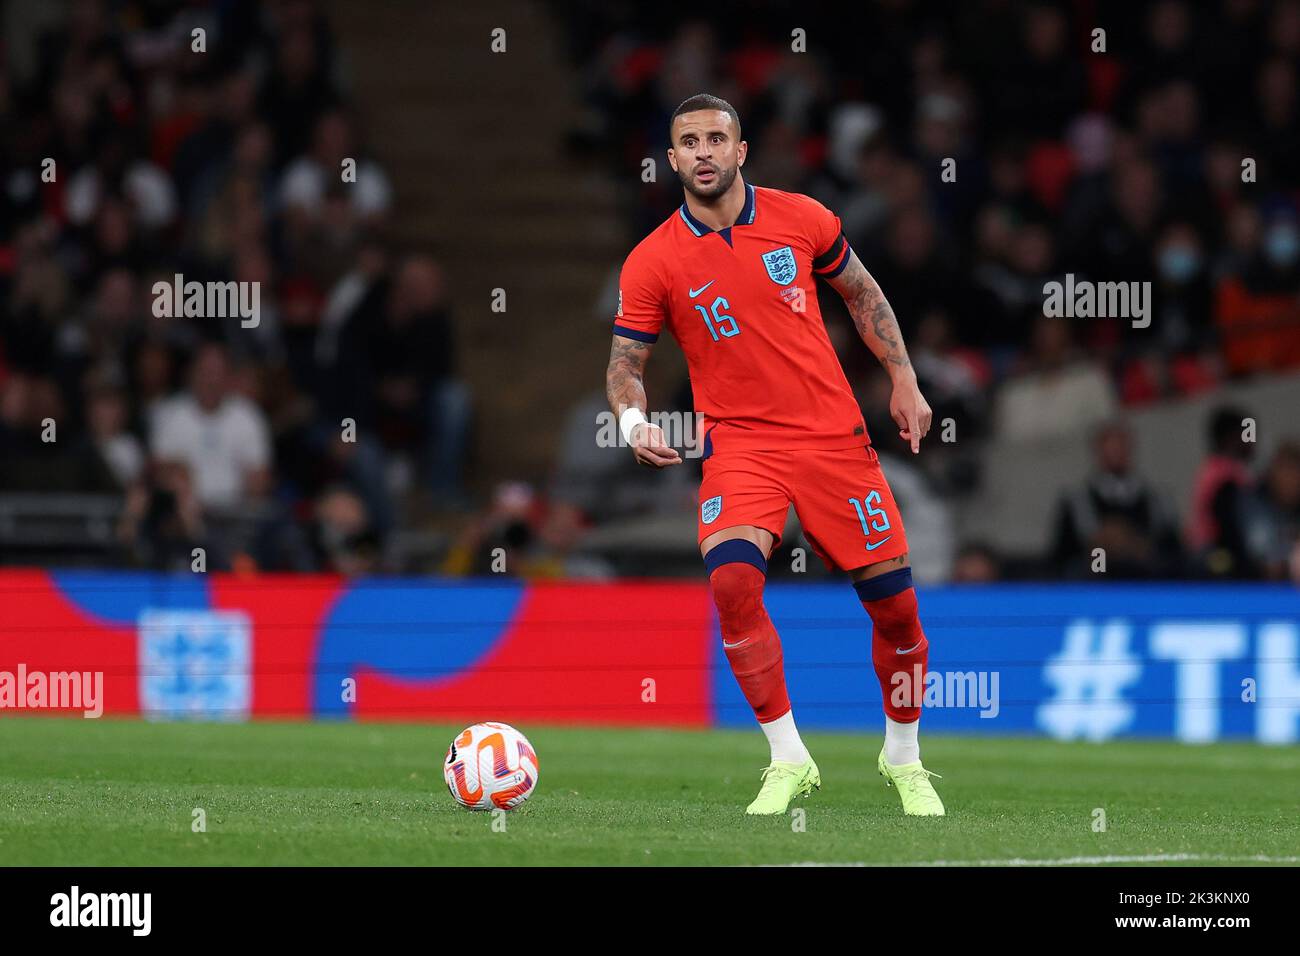 London, UK. 26th Sep, 2022. Kyle Walker of England in action. England v Germany, UEFA Nations league International group C match at Wembley Stadium in London on Monday 26th September 2022. Editorial use only. pic by Andrew Orchard/Andrew Orchard sports photography/Alamy Live News Credit: Andrew Orchard sports photography/Alamy Live News Stock Photo